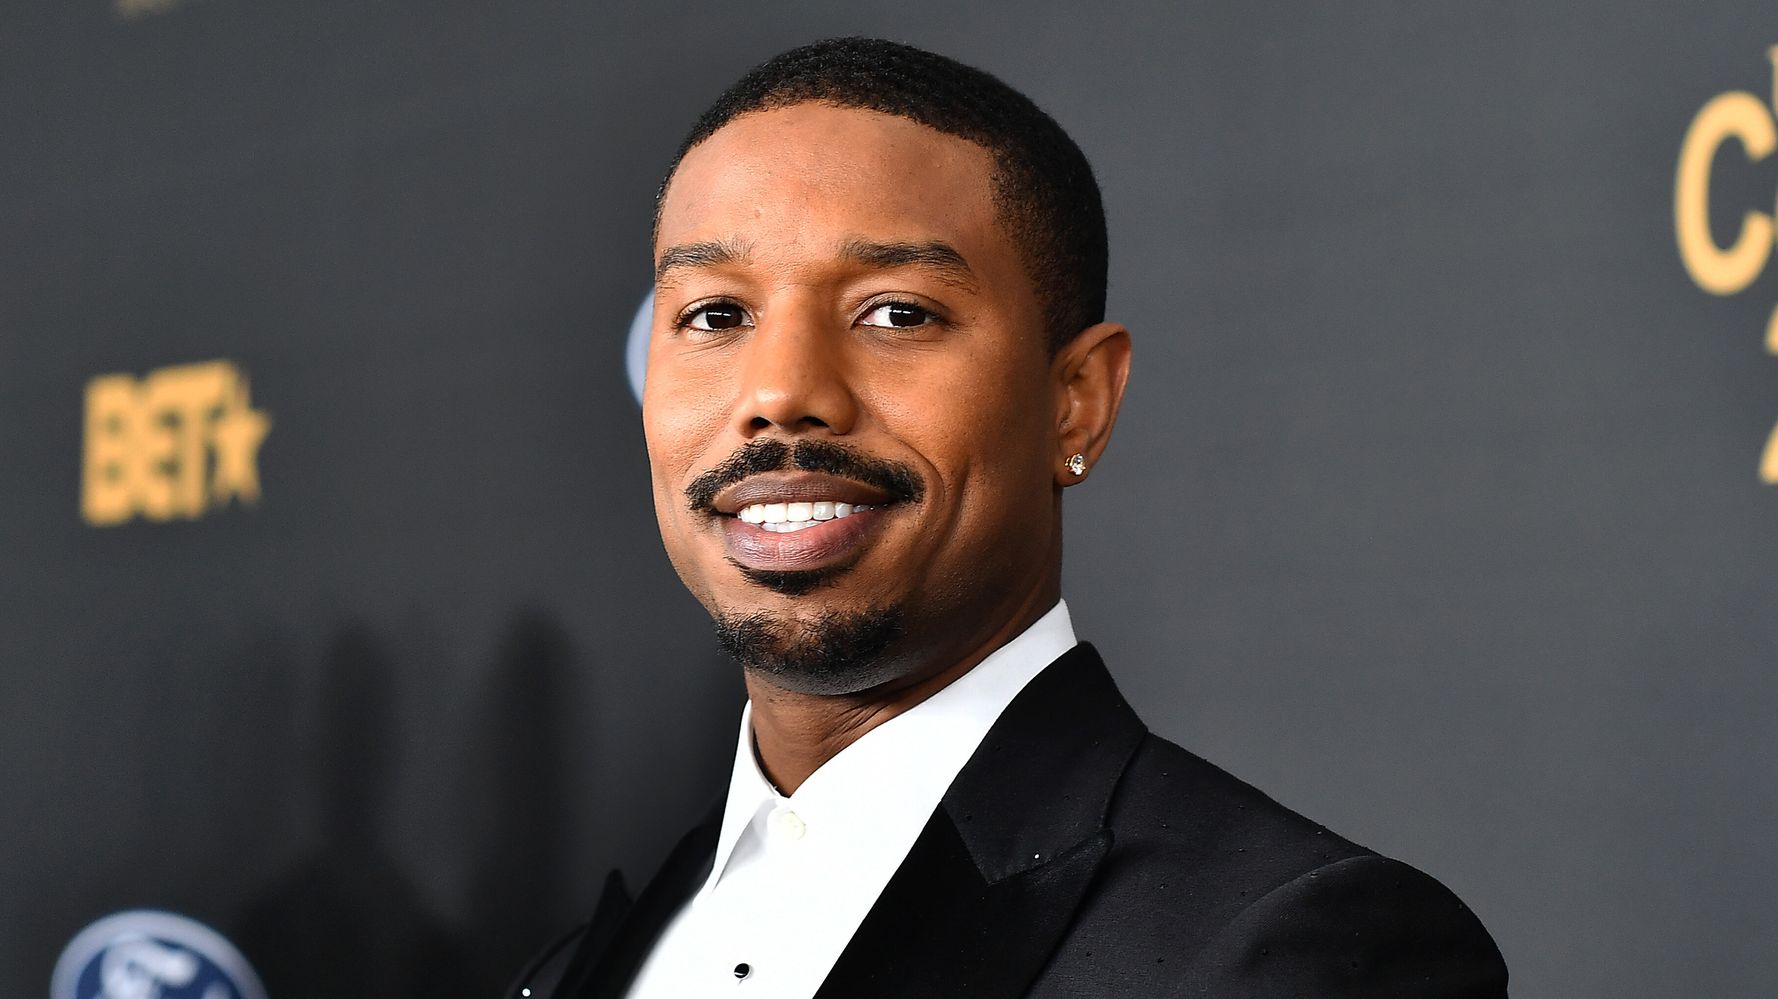 Michael B. Jordan On Why People's 'Sexiest Man Alive' Title Is 'A Gift And A Curse'